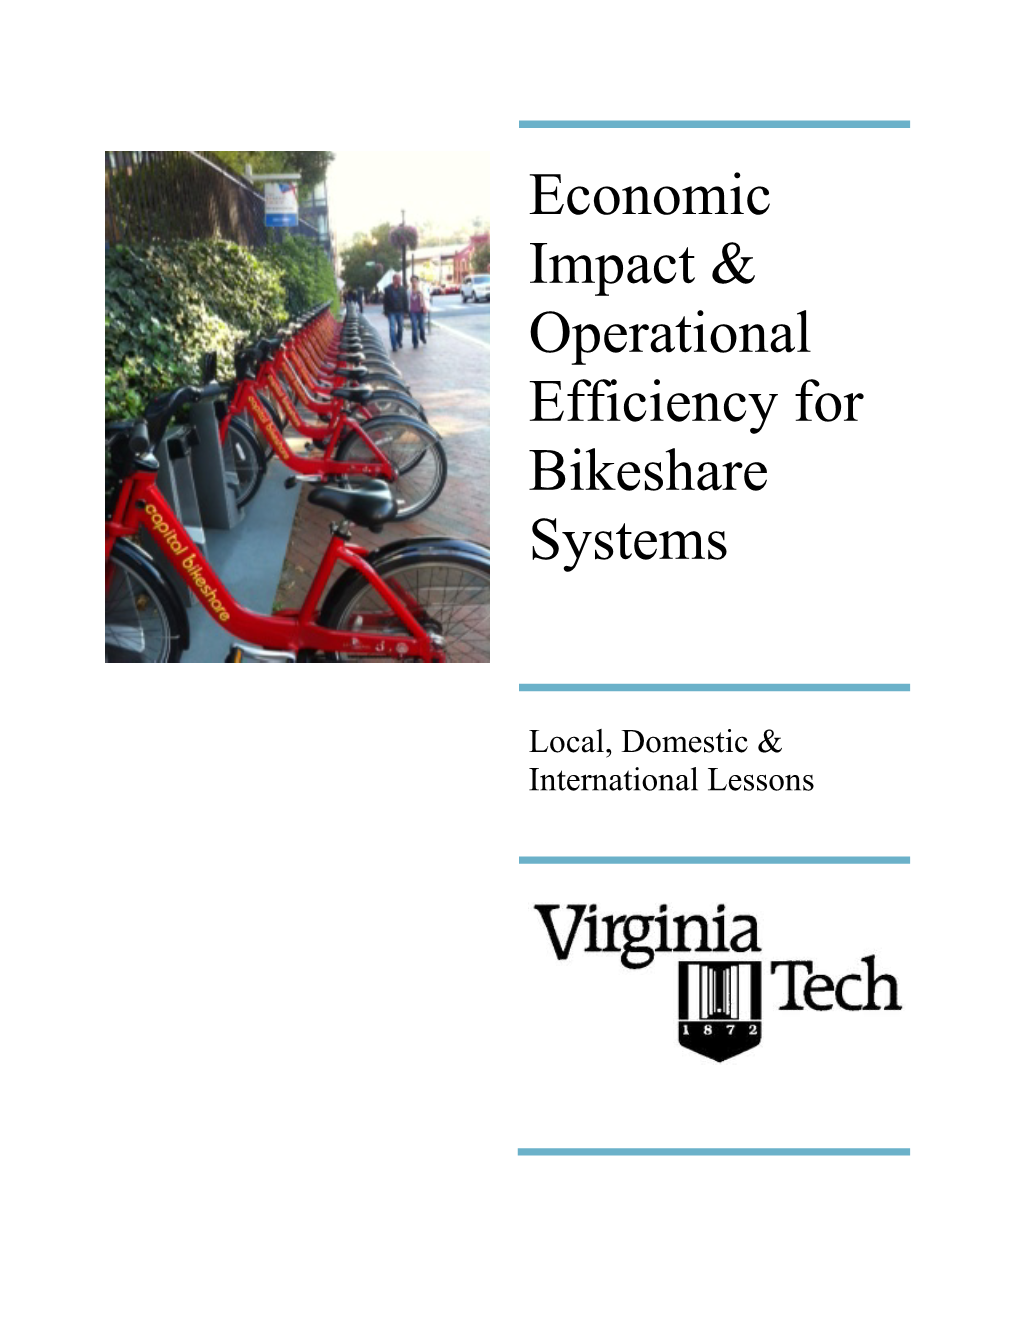 Economic Impact & Operational Efficiency for Bikeshare Systems